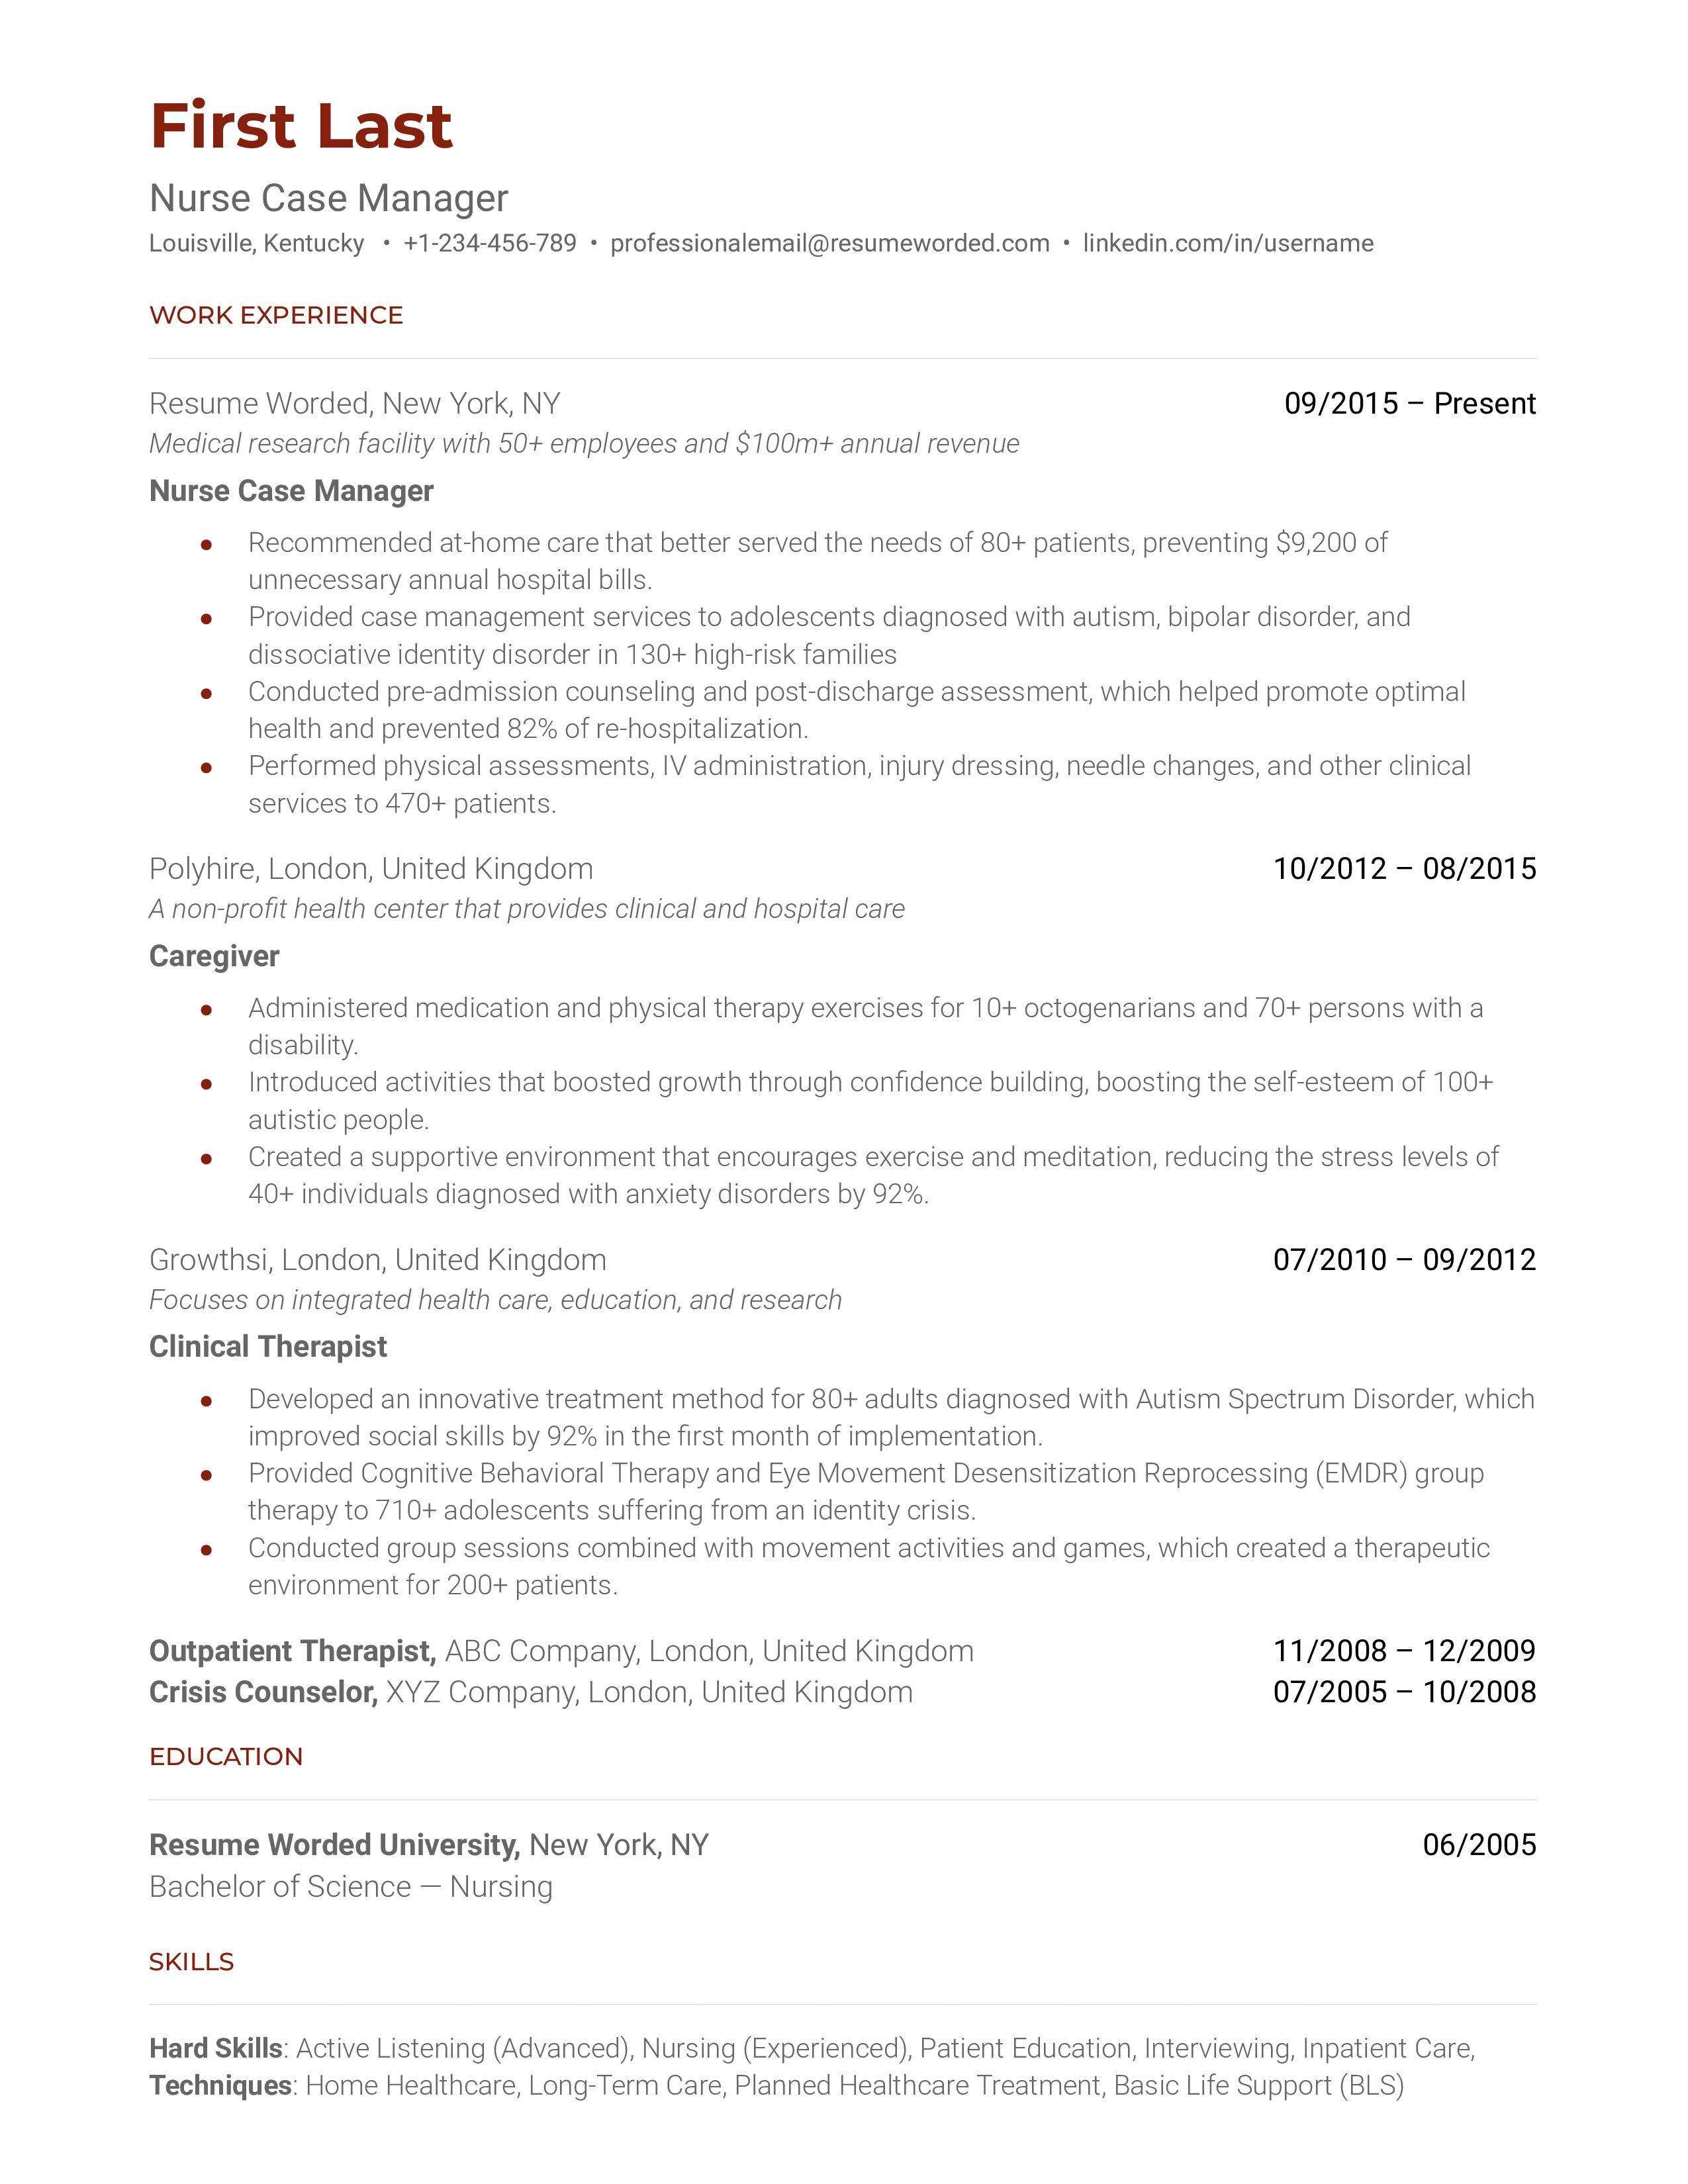 Professional CV template for a Nurse Case Manager role.